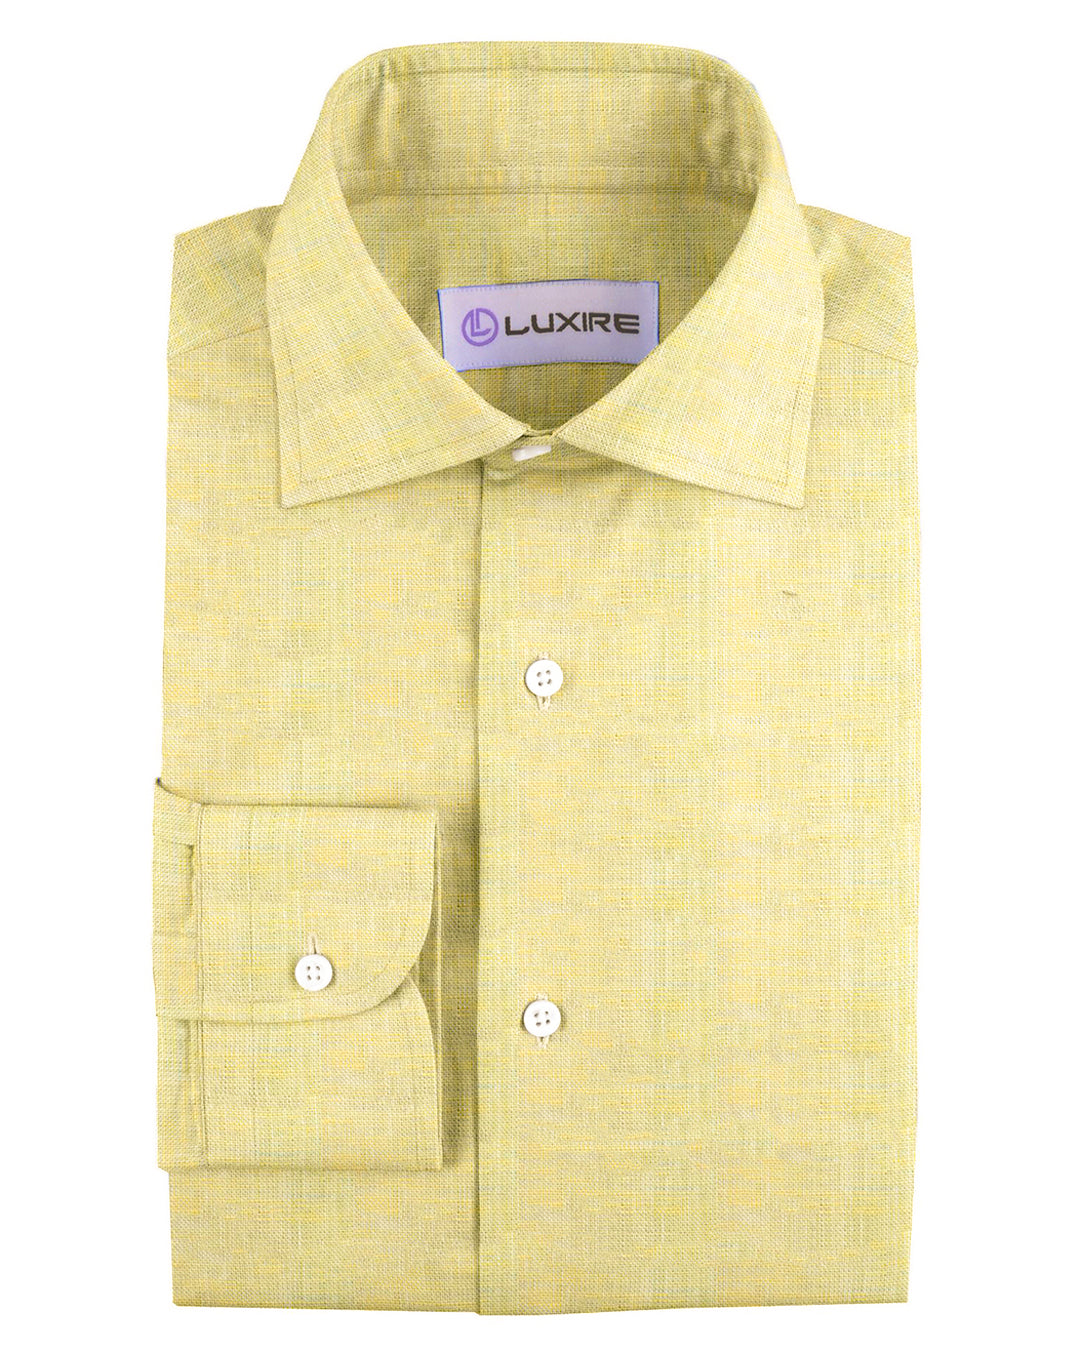 Front view of custom linen shirt for men in pale yellow